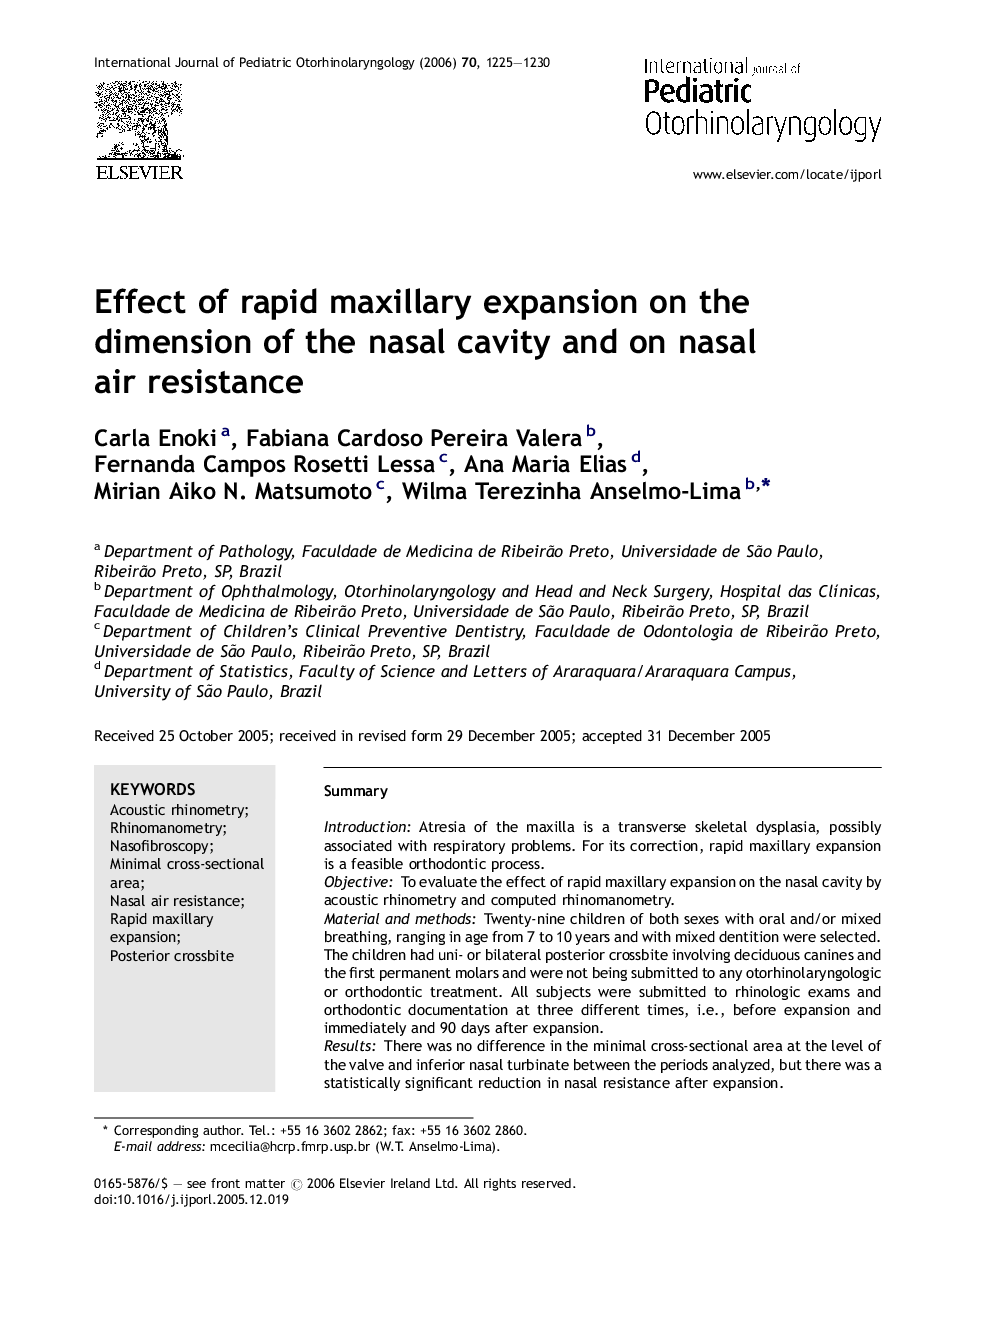 Effect of rapid maxillary expansion on the dimension of the nasal cavity and on nasal air resistance